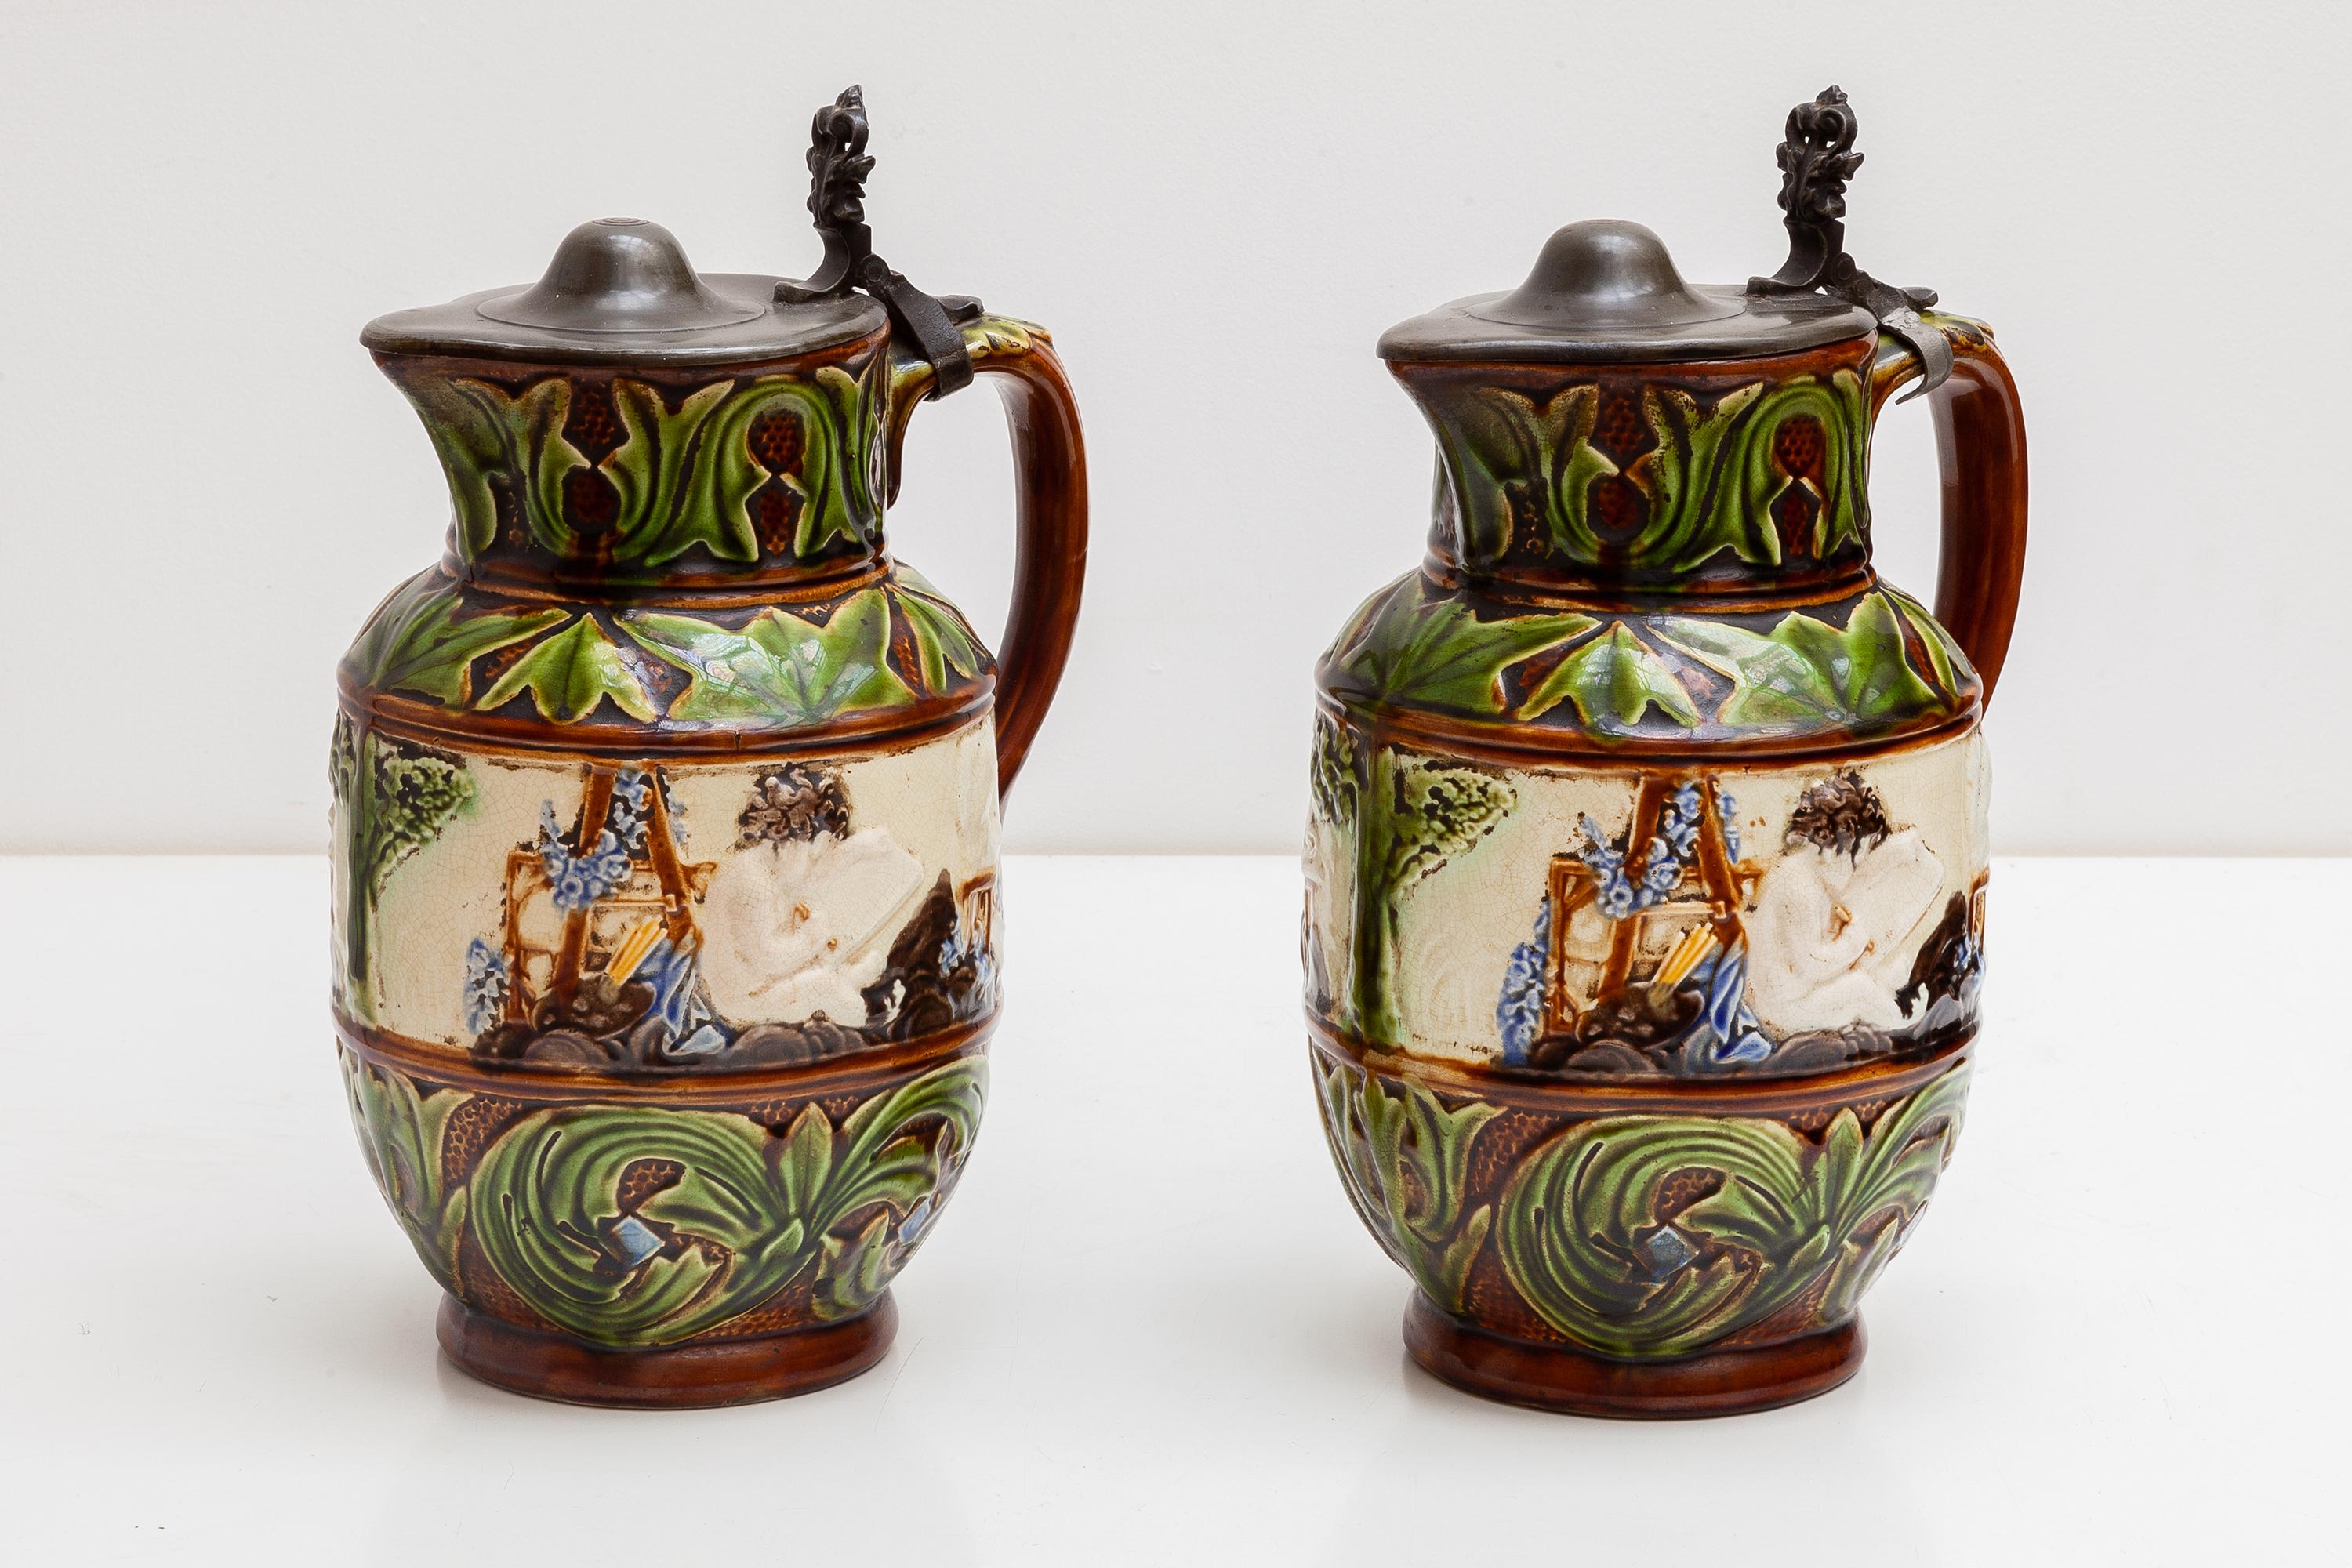 A set of 1851-1898 Belgium majolica pitchers, pottery jugs with pewter top.White hand painted cherubs sitting in a painting impression and accessories, at the bottom and at the top decorated with akanthos green leaves and trees.
Marks include